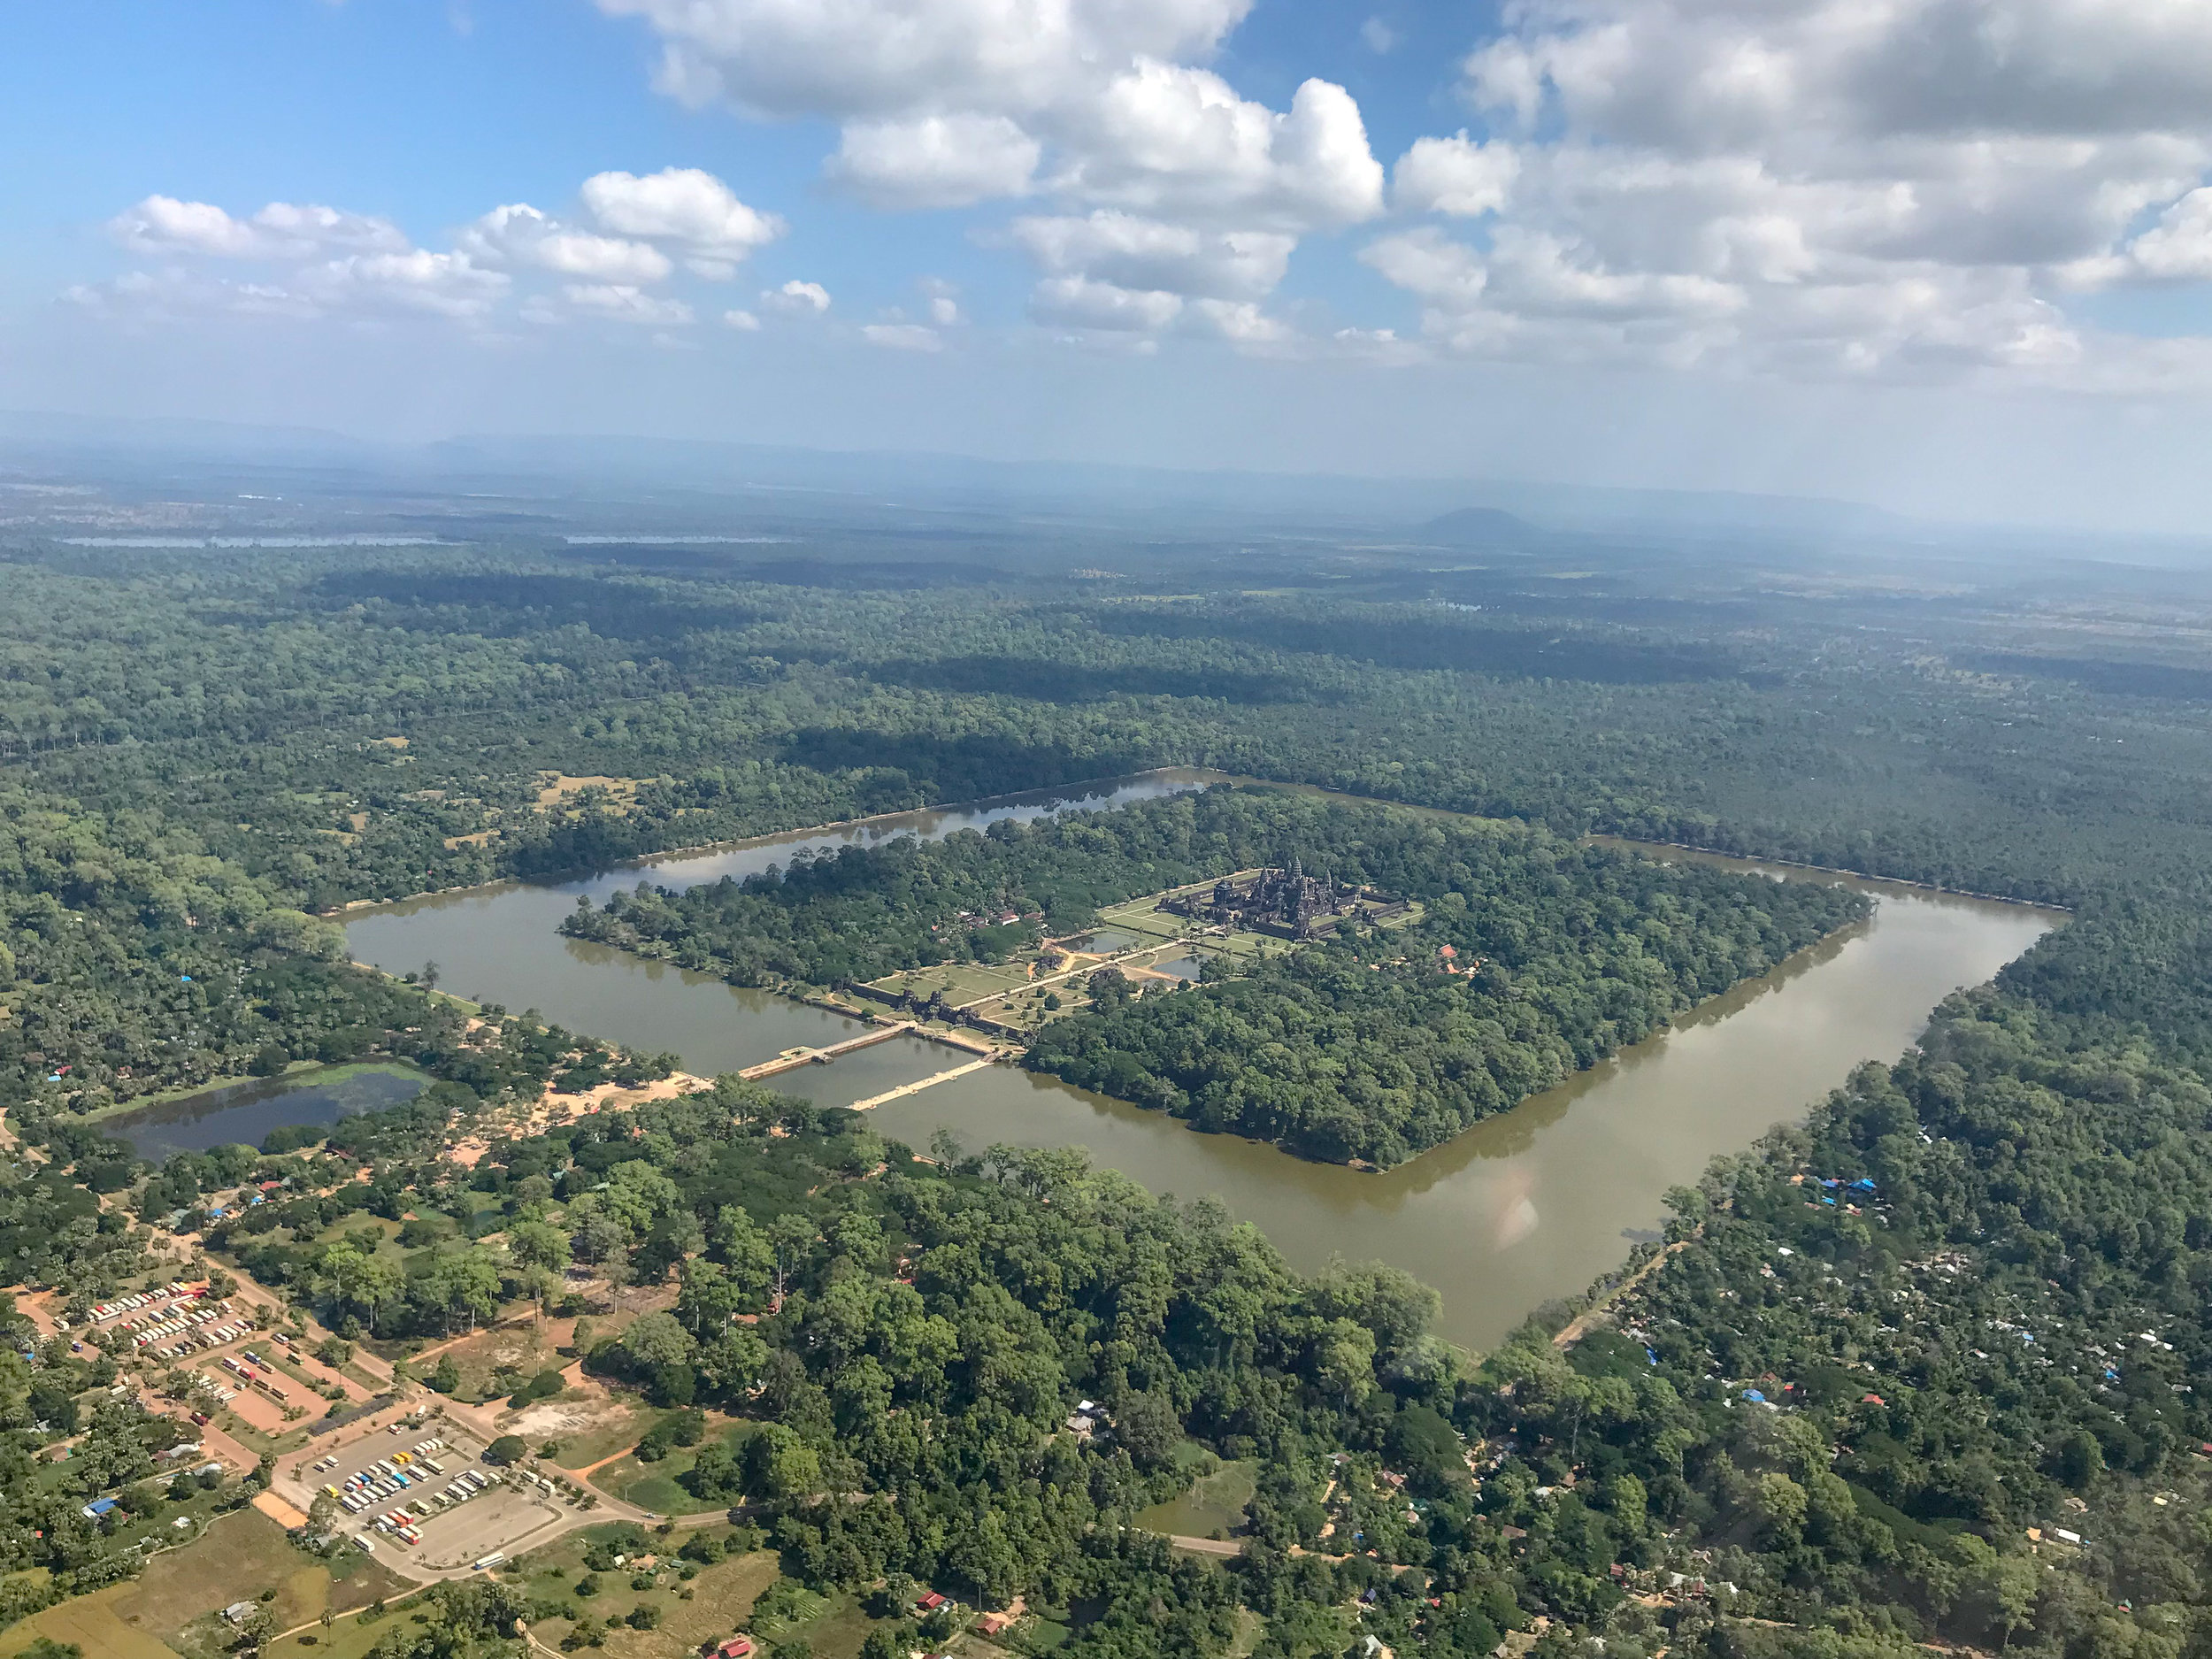 Angkor Wat from helicopter, Siem Reap, Cambodia